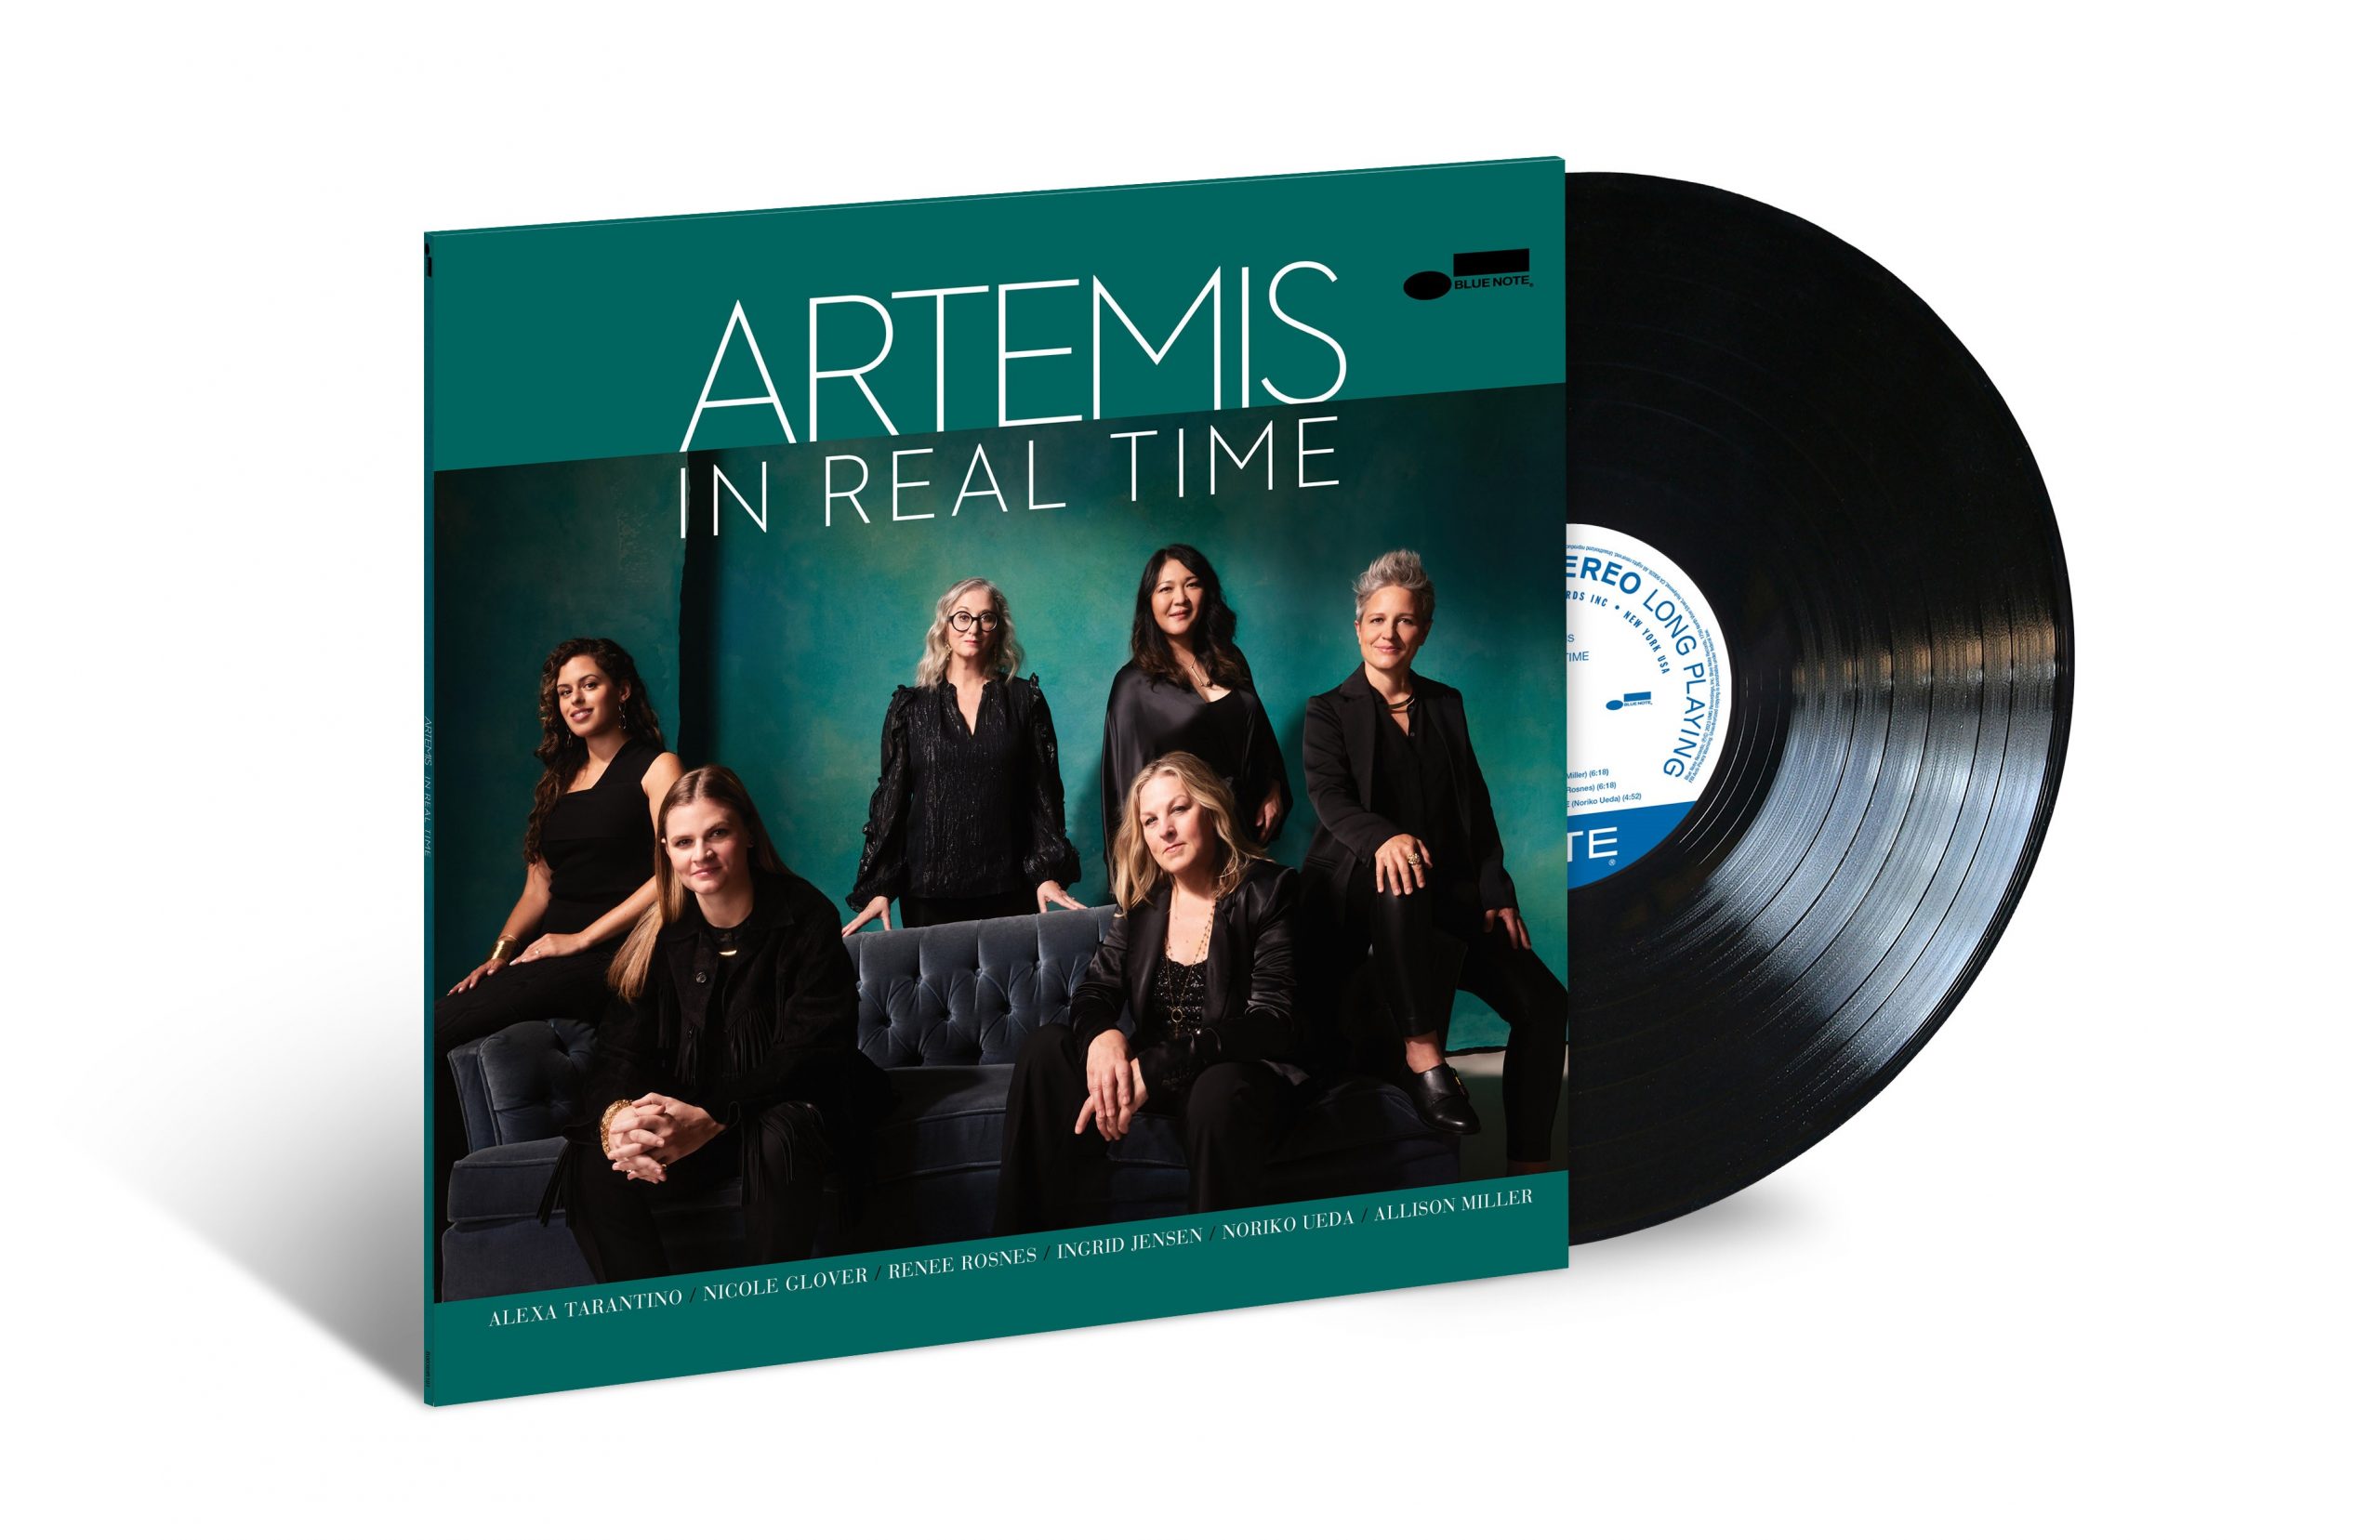 Win a vinyl copy of In Real Time by Artemis